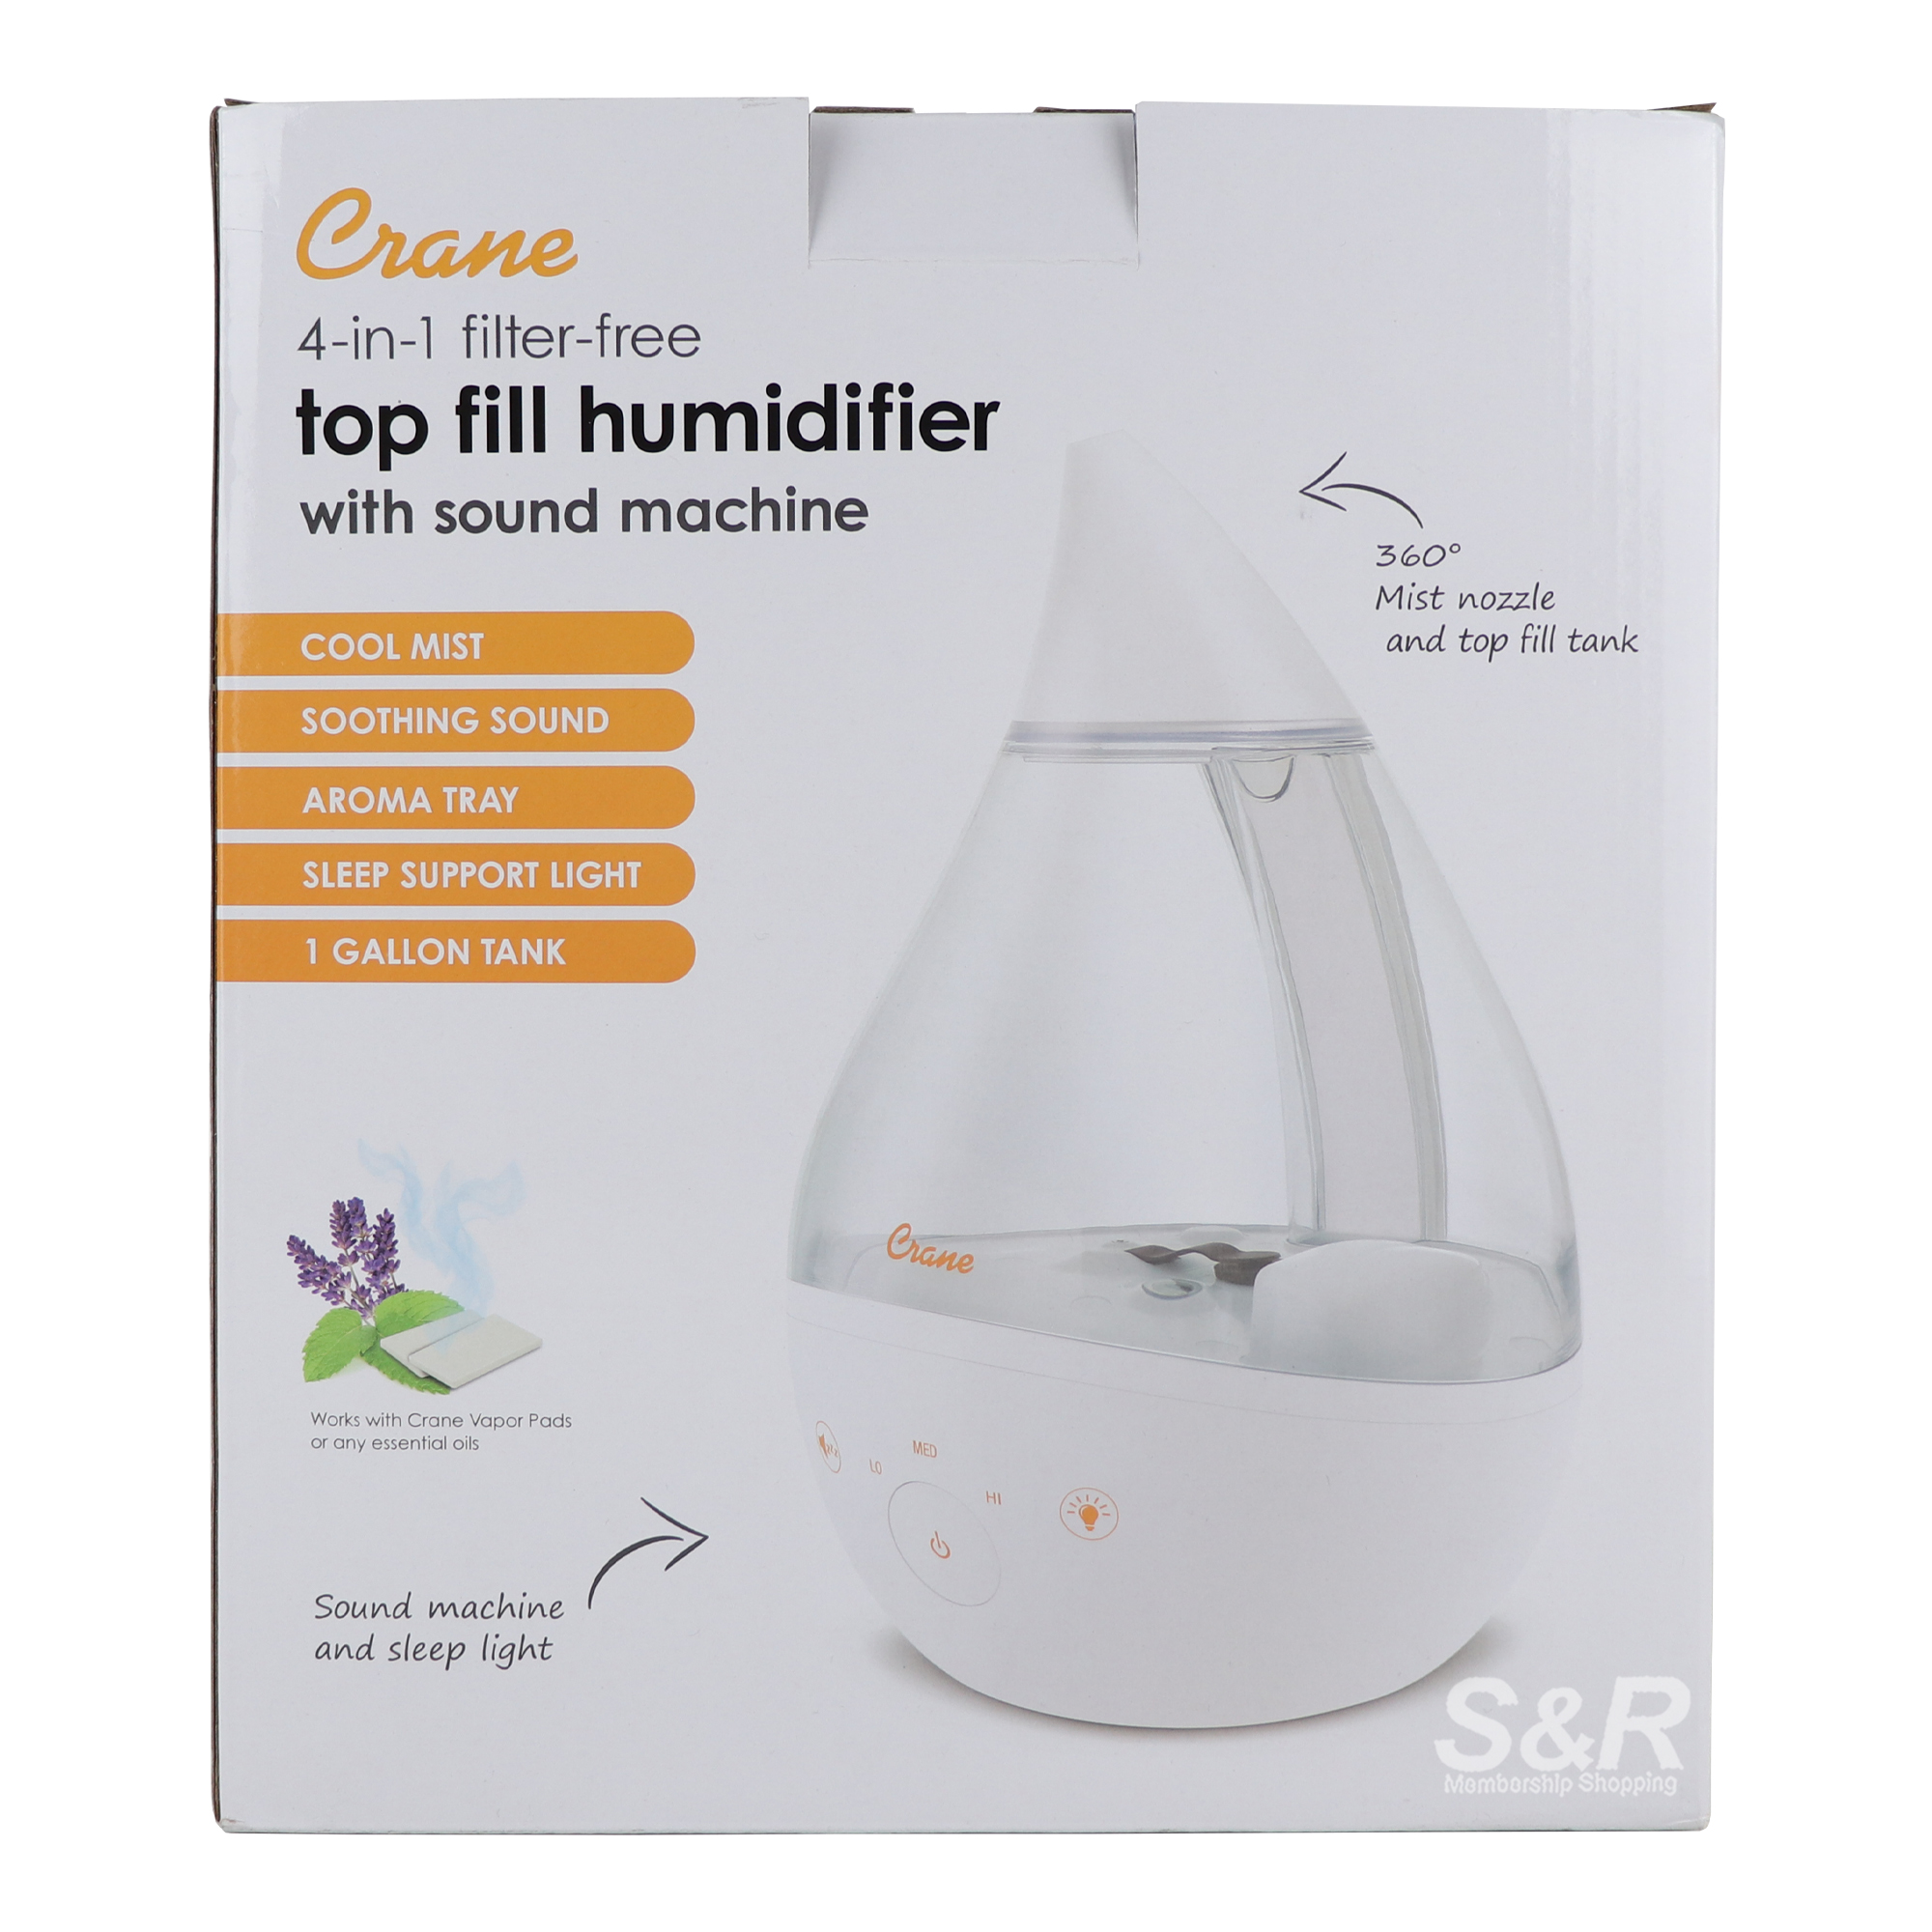 Crane 4-in1 Filter Free Top Fill Humidifier with Sound Machine EE-5306CW 1pc